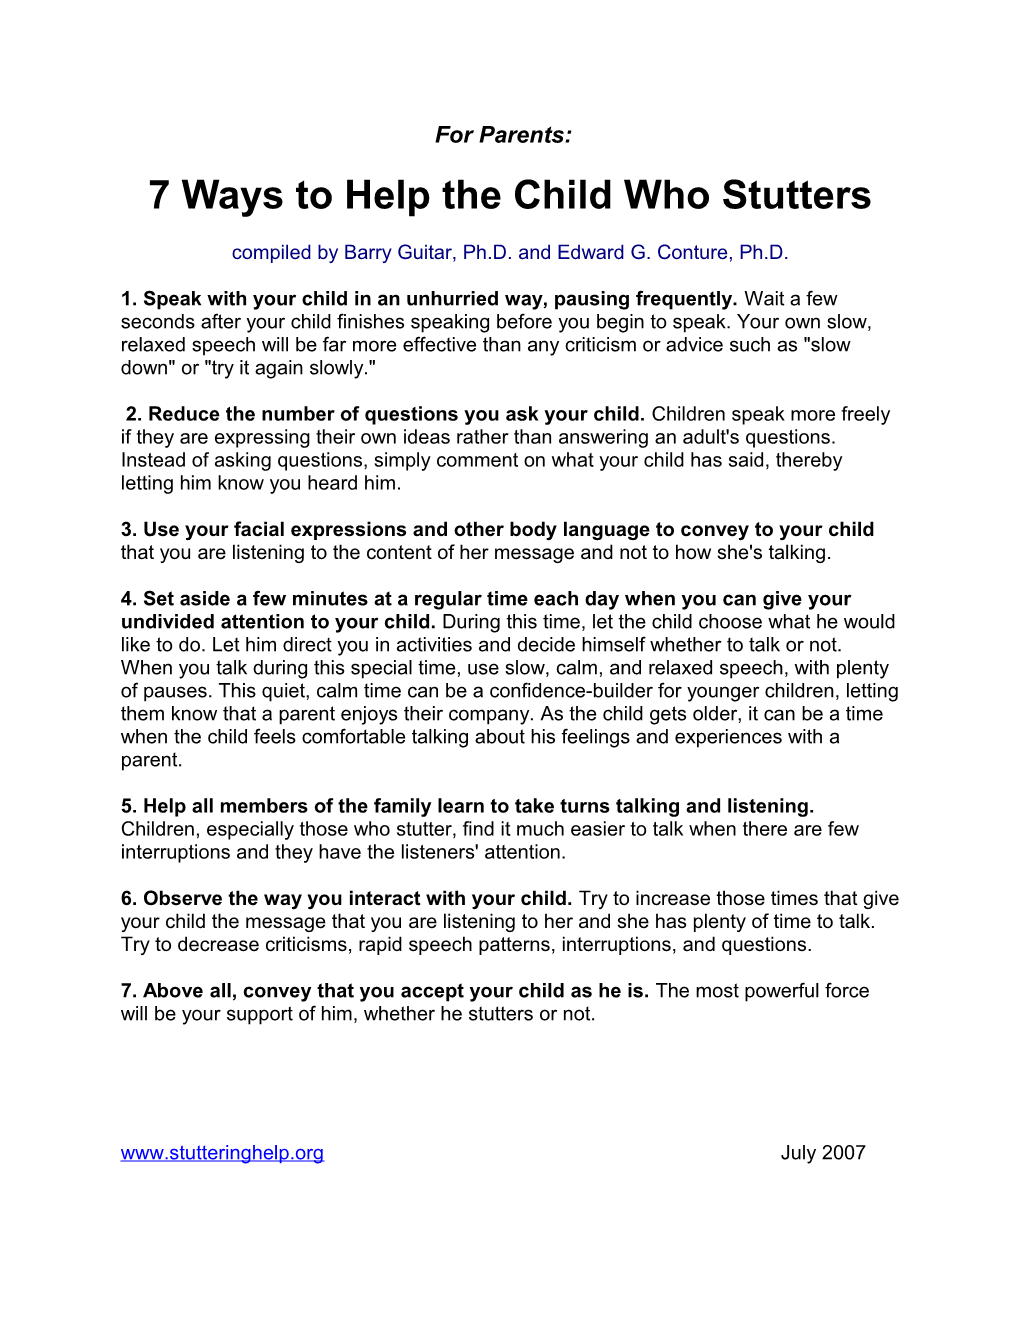 7 Ways to Help the Child Who Stutters